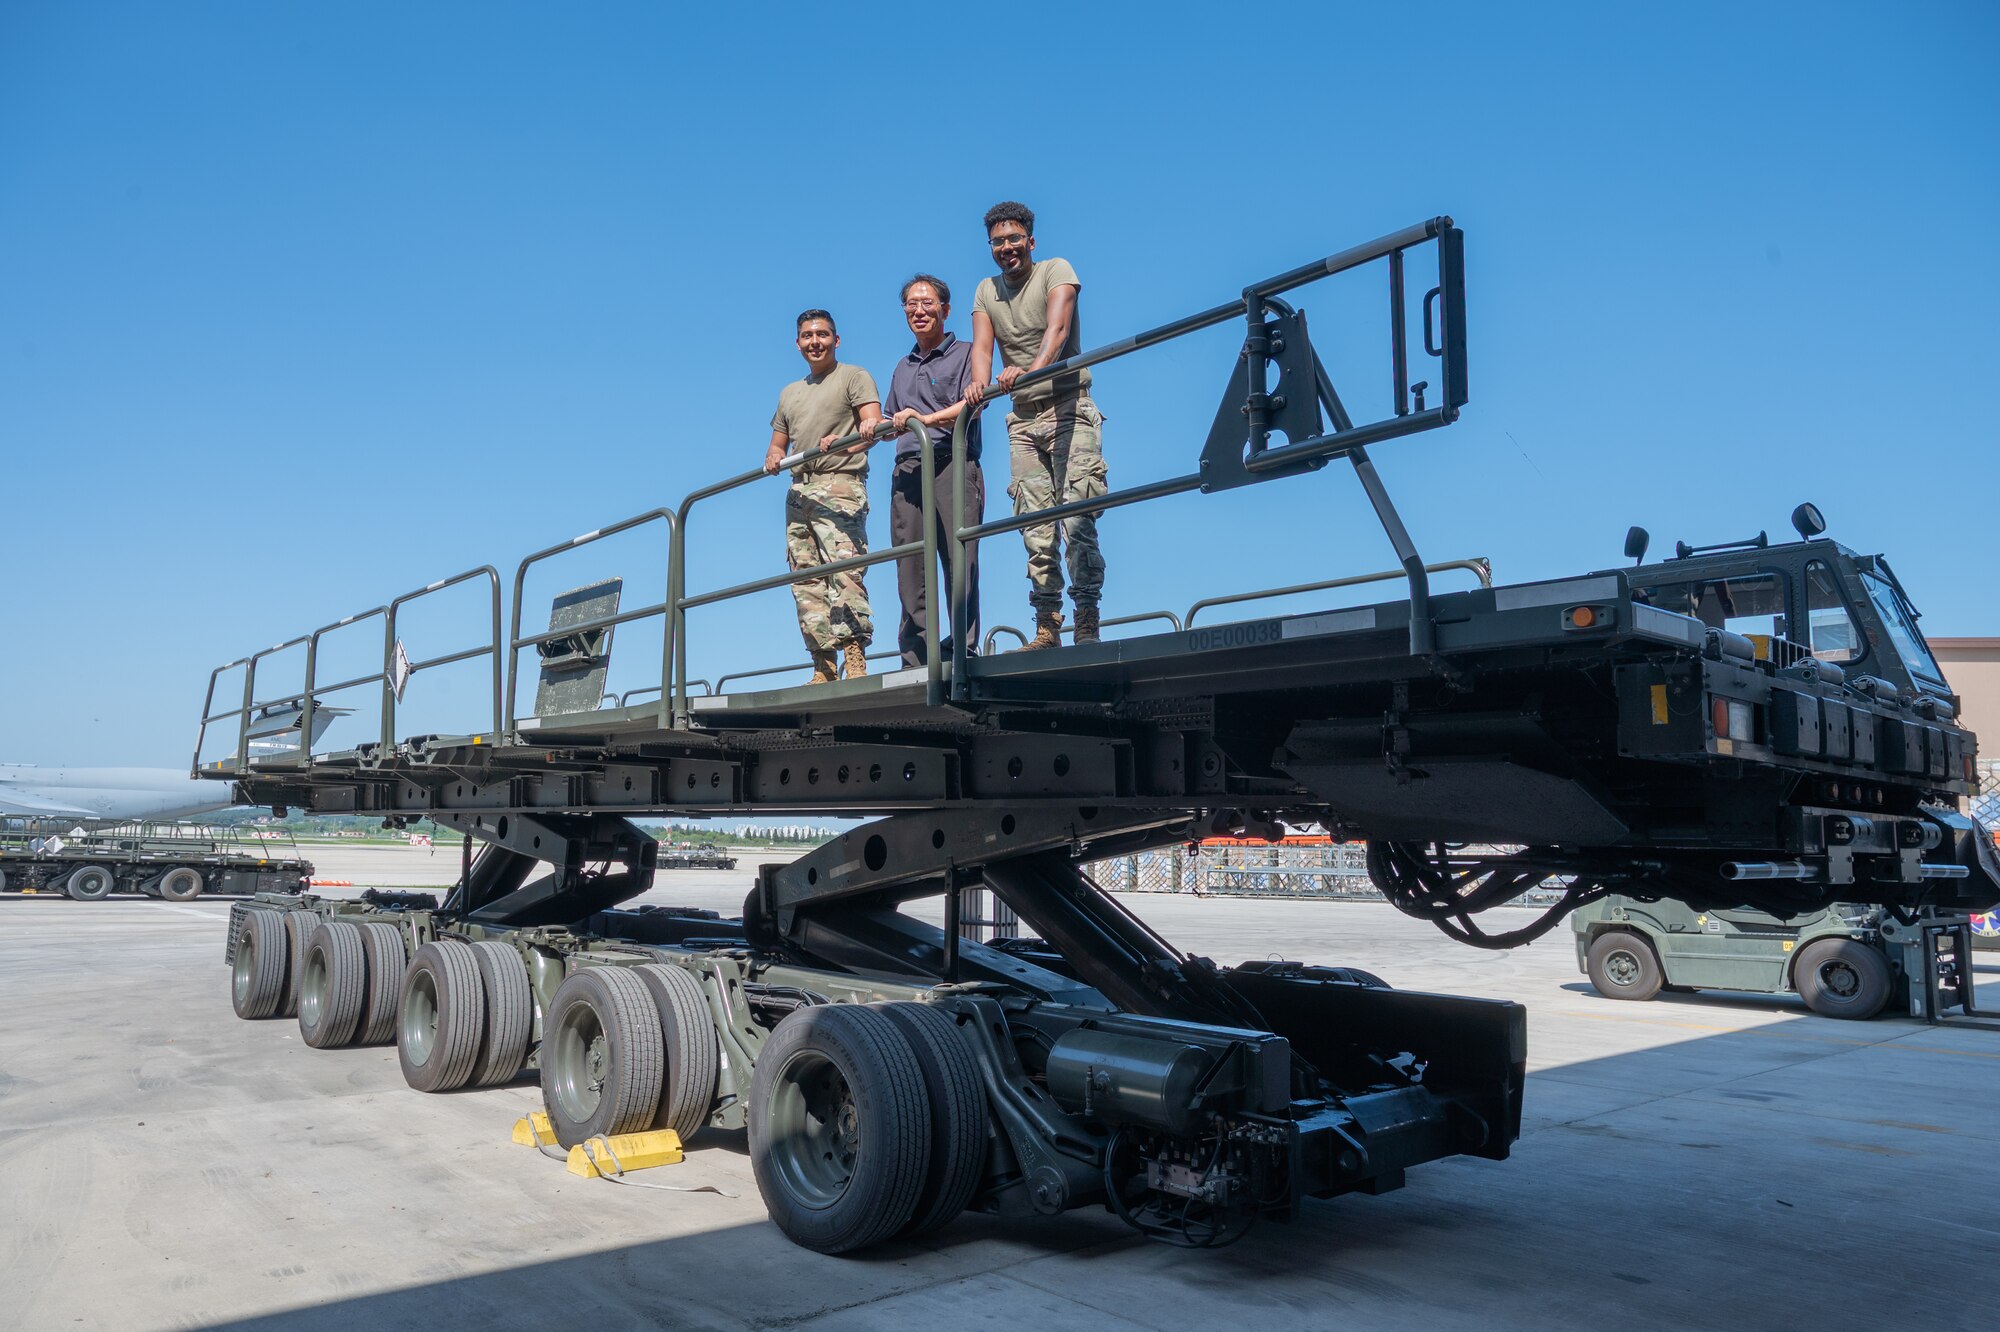 From the left, U.S. Air Force Staff Sgt. John Bello, Yi San Young, and Senior Airman Dillion Evans, 51st Logistics Readiness Squadron material handling equipment maintainers, pose for a photo at Osan Air Base, Republic of Korea, Sept. 8, 2023. The vehicle validation process ensures equipment like an aircraft loader and transporter, is being utilized for its purpose and remains within Air Force standards to ensure mission readiness of the 51st Fighter Wing. (U.S. Air Force photo by Staff Sgt. Kelsea Caballero)